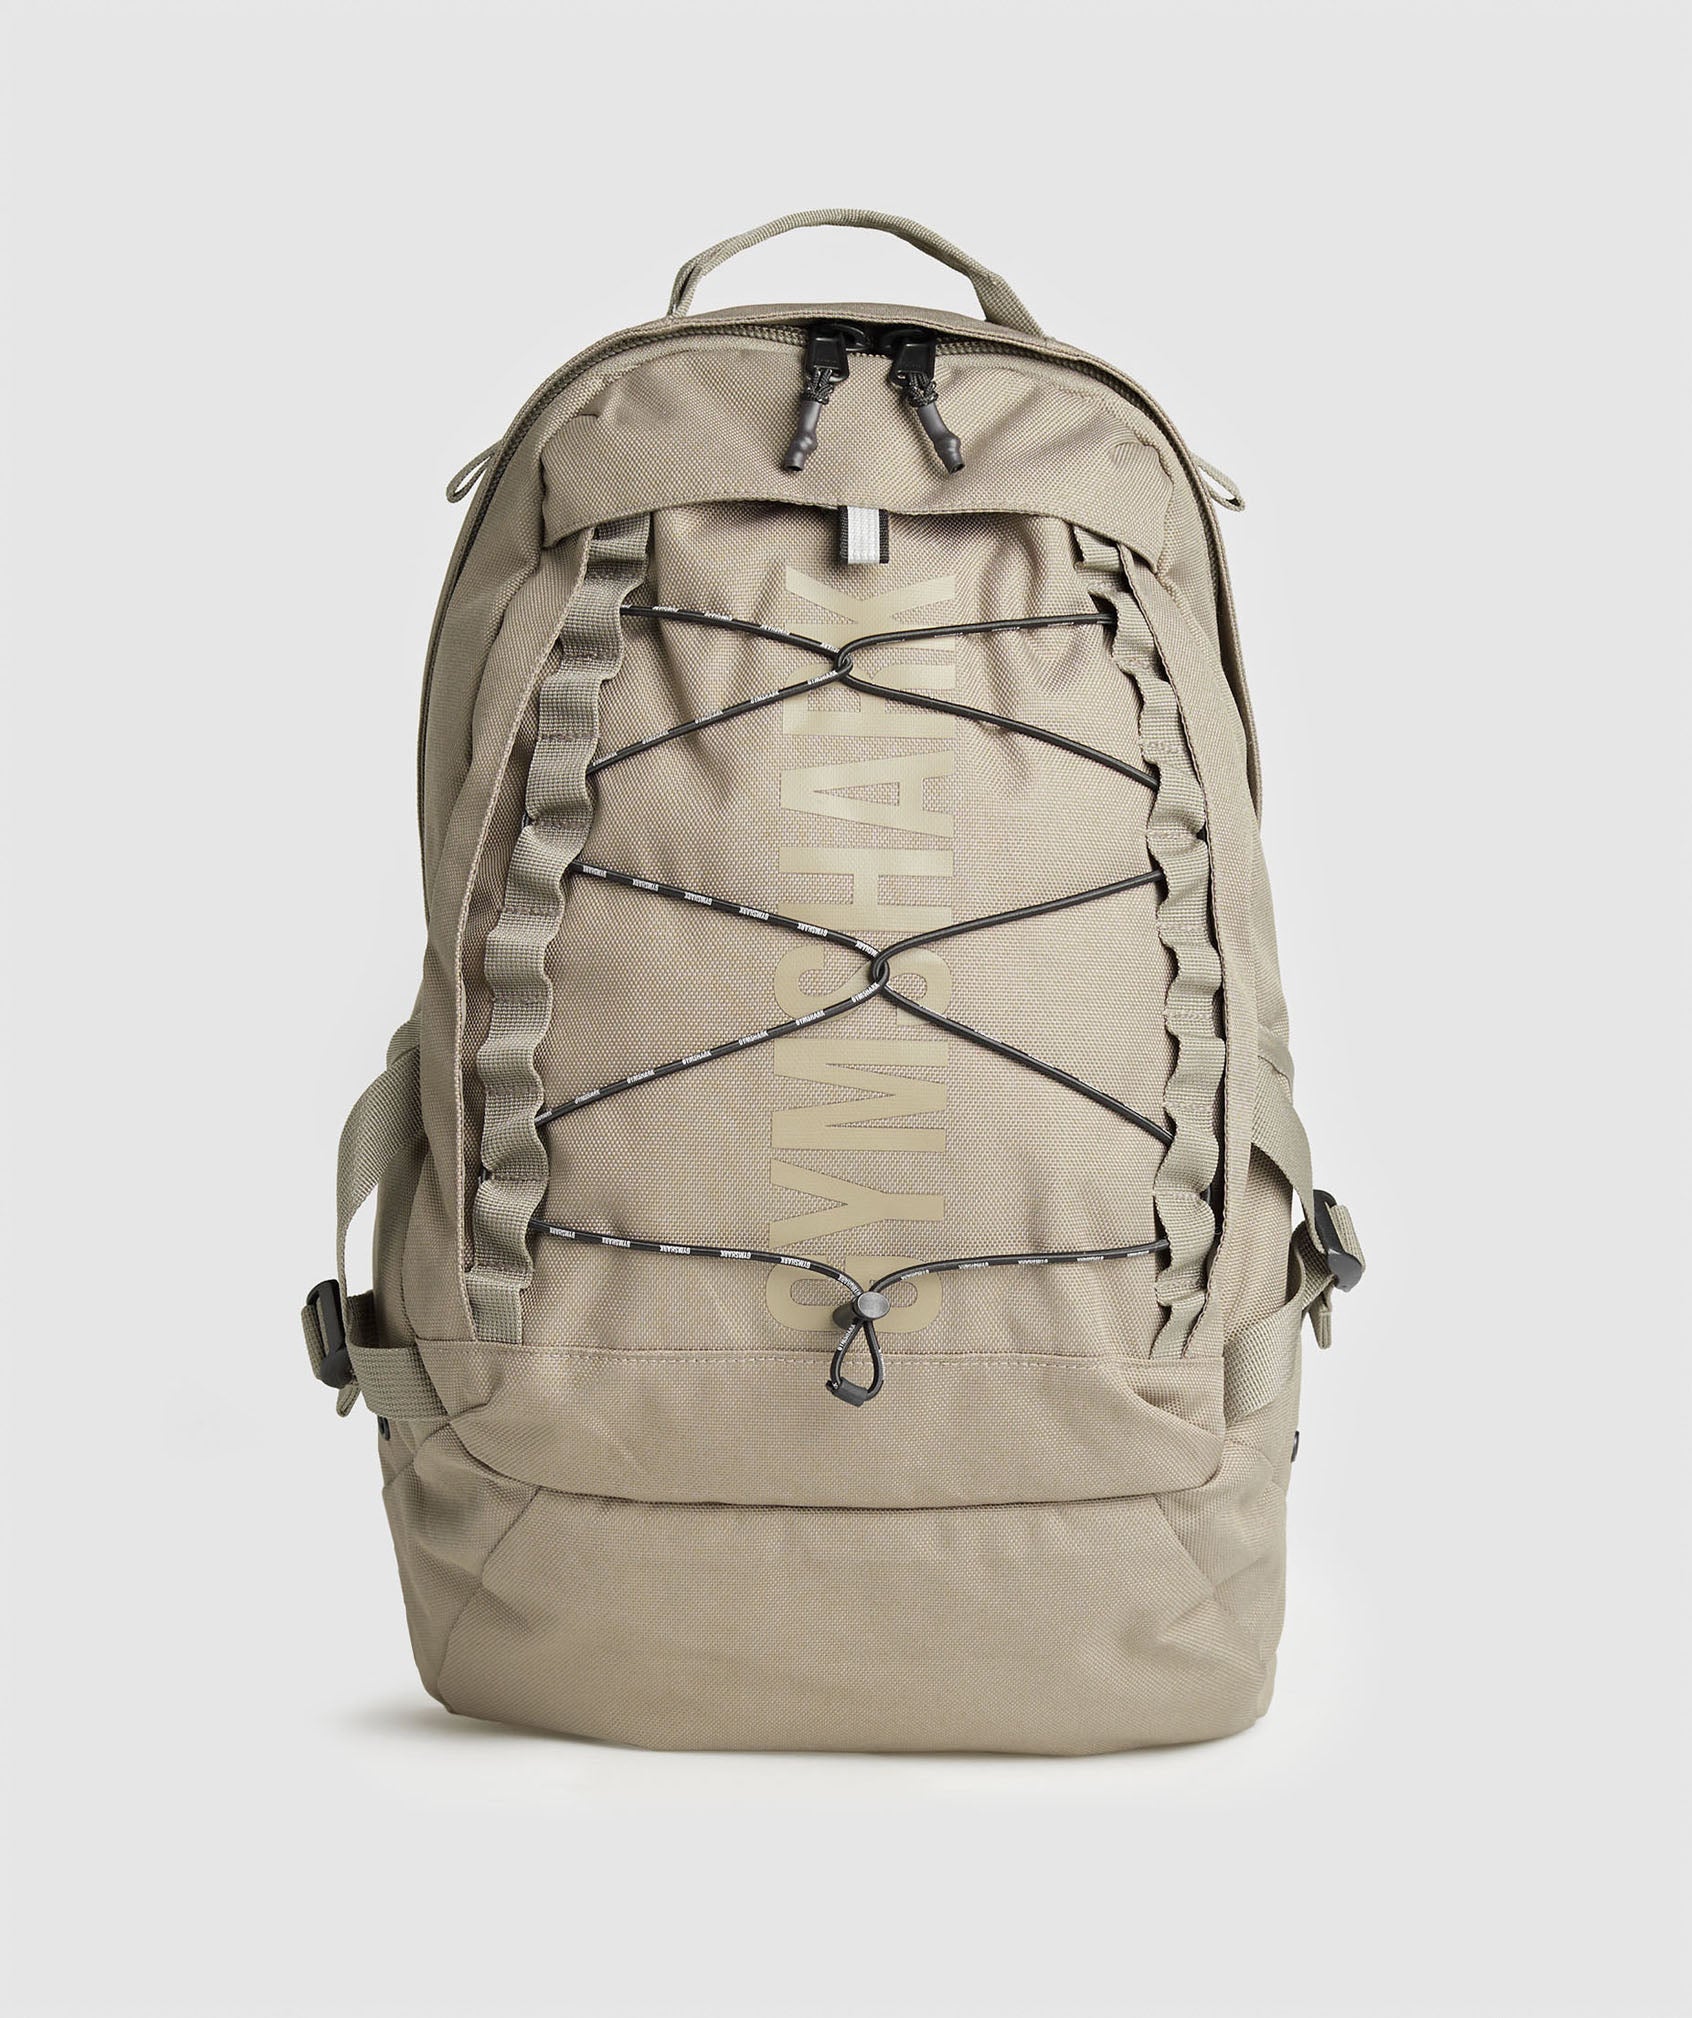 Pursuit Backpack in Brown - view 1